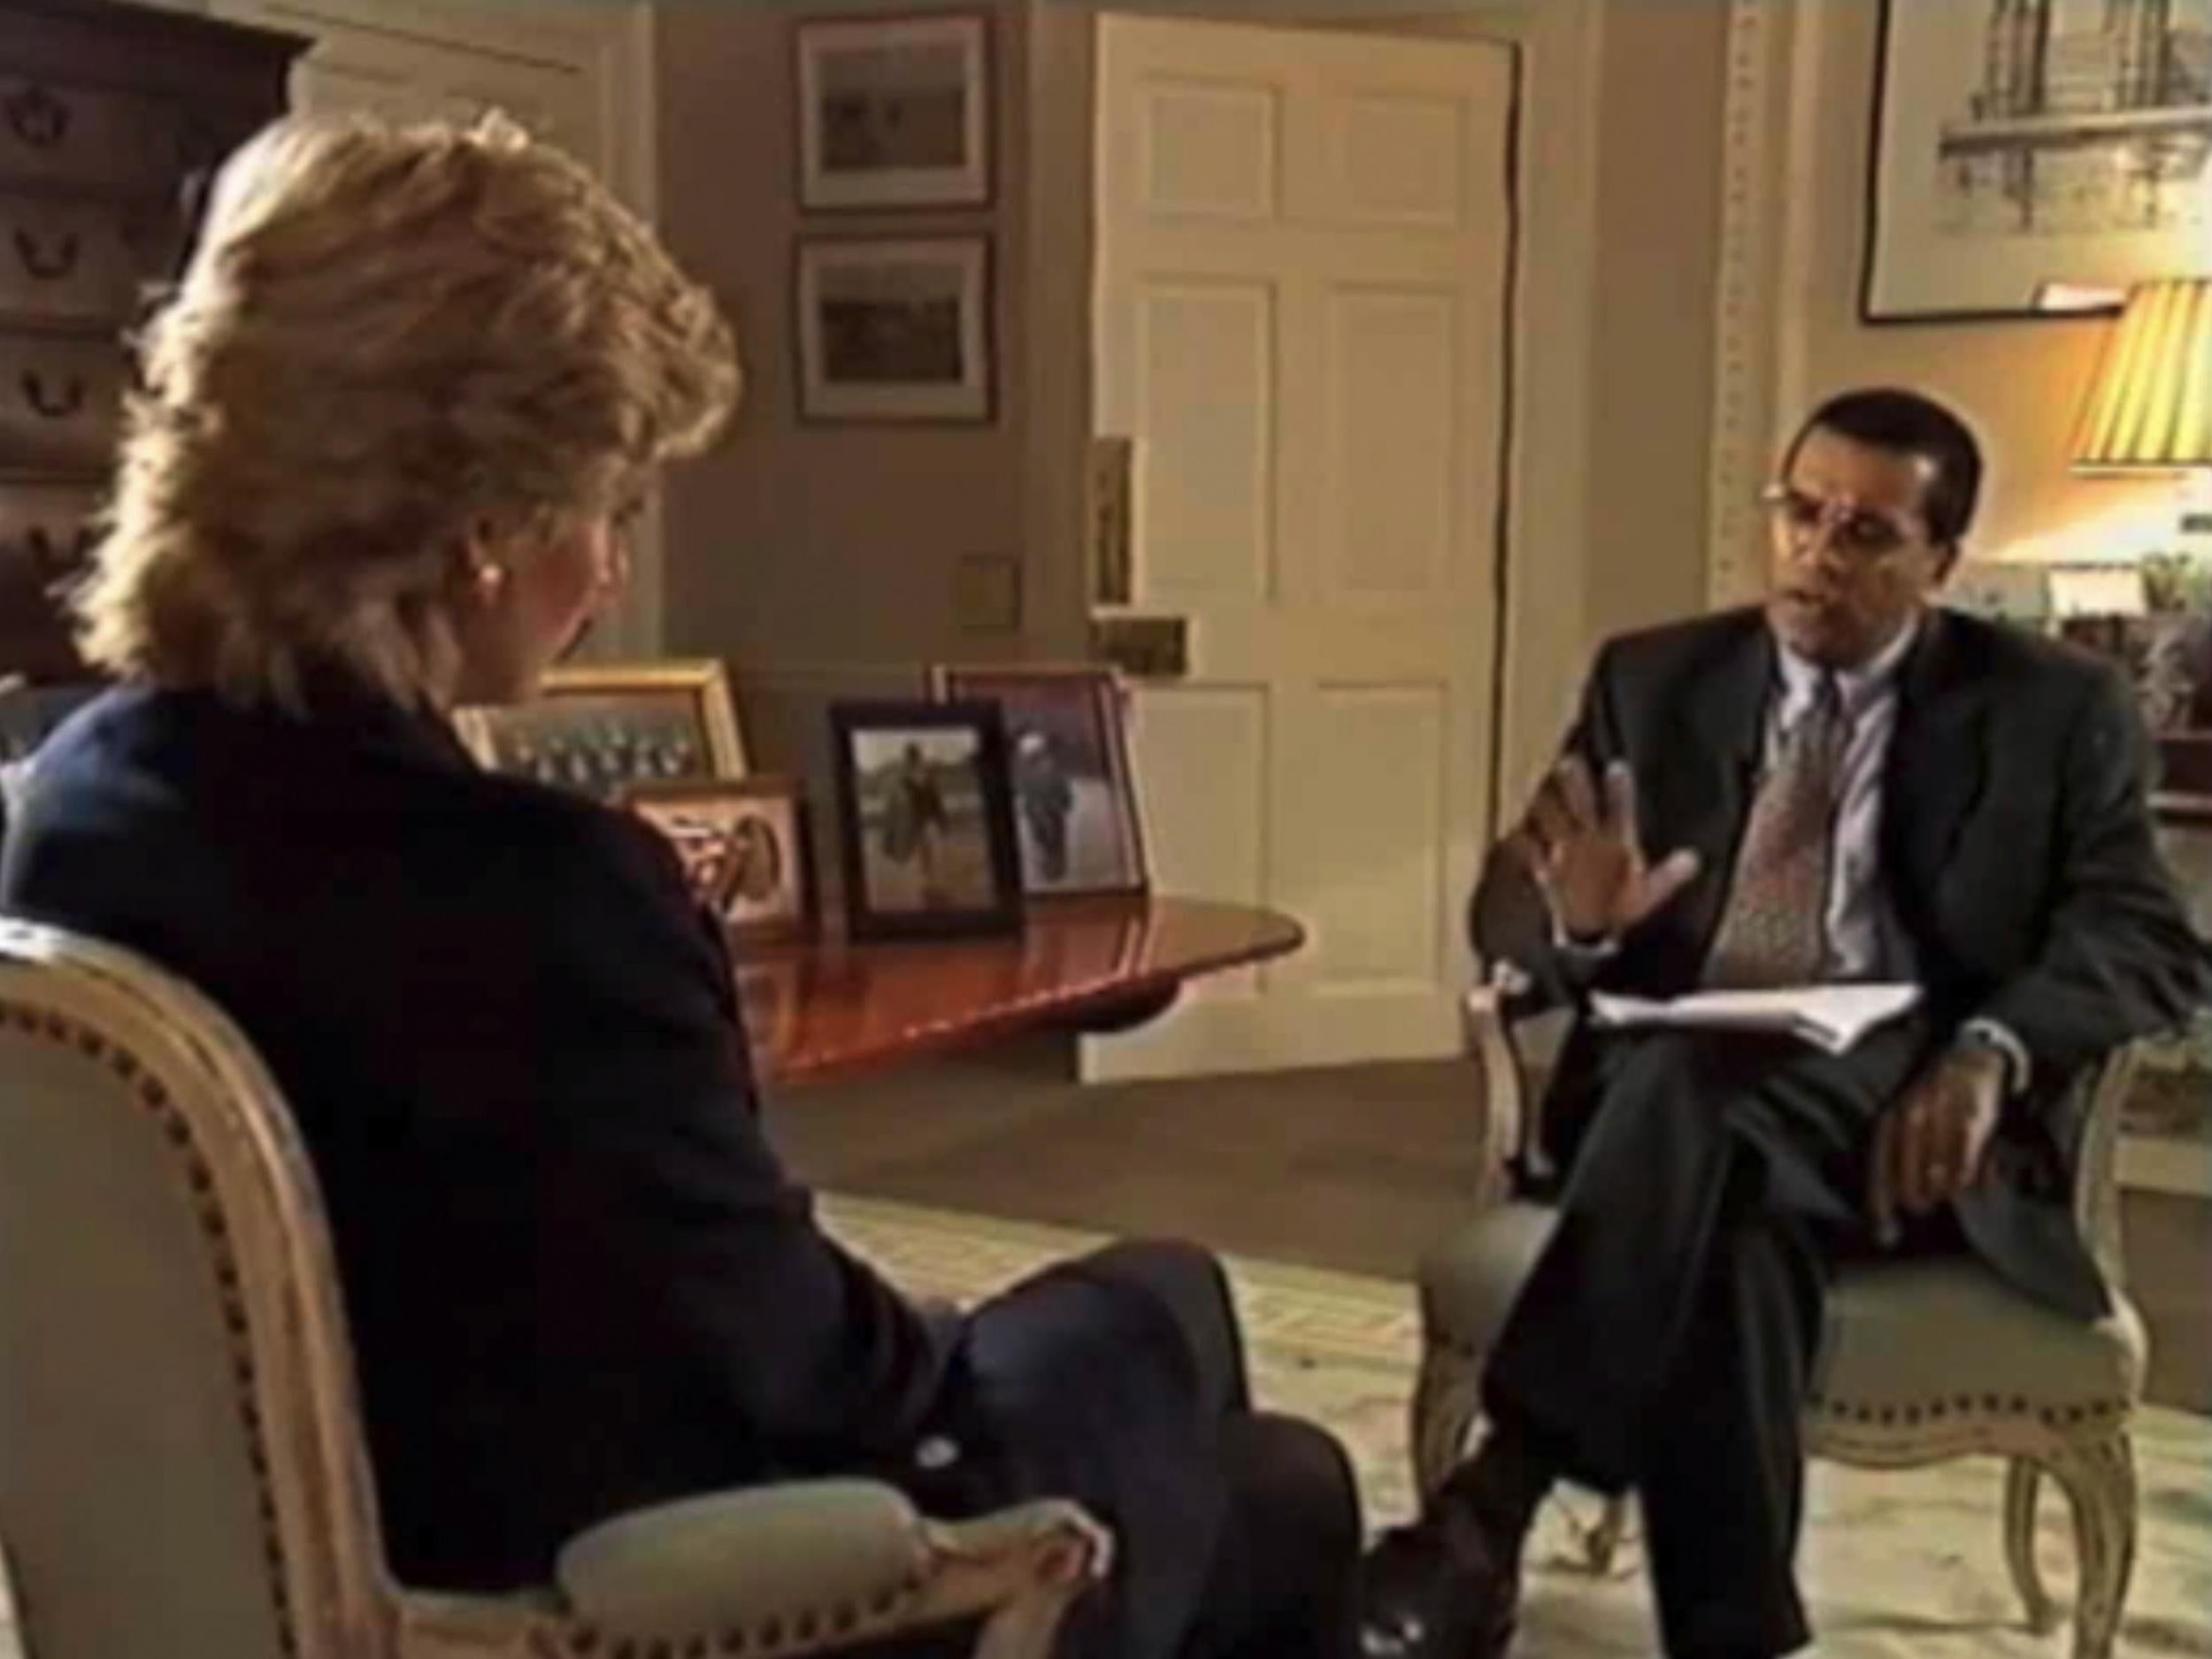 Princess Diana being interviewed by Martin-Bashir on Panorama in 1995